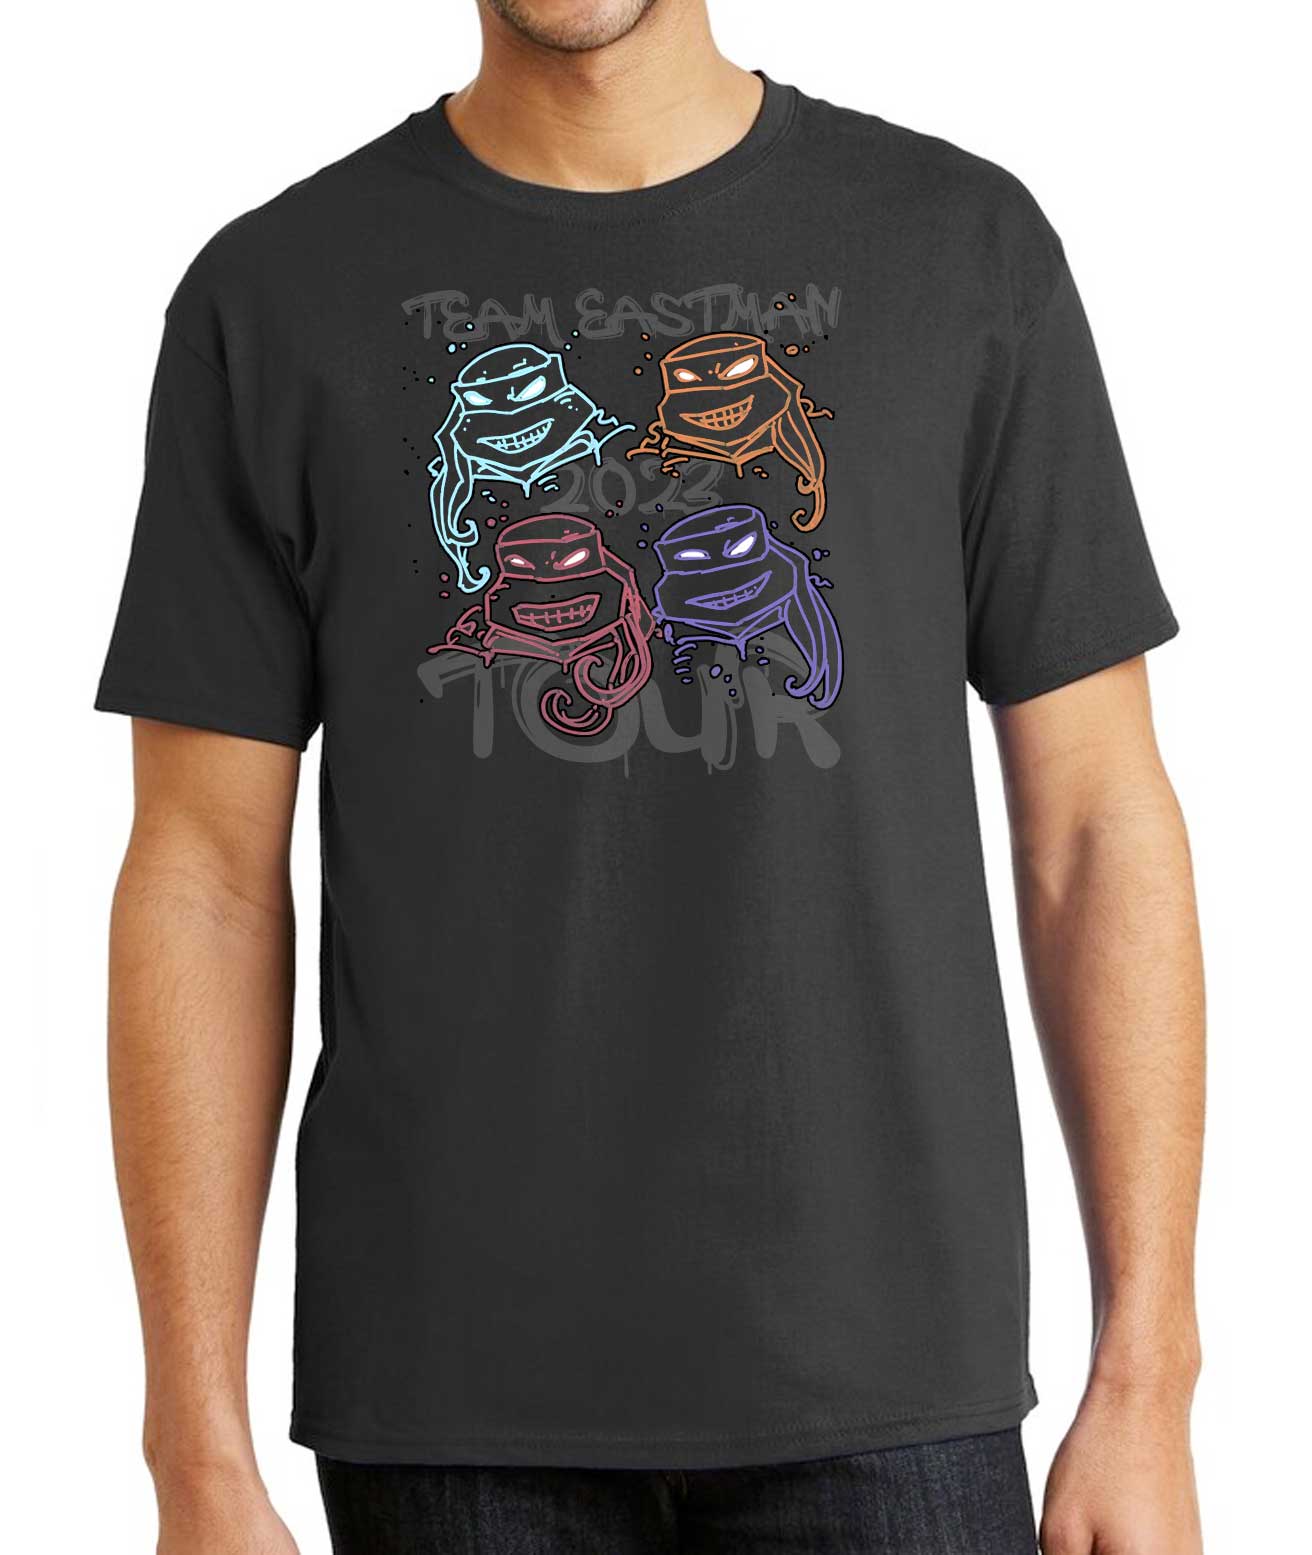 2023 Team Eastman Tour Tees are now available